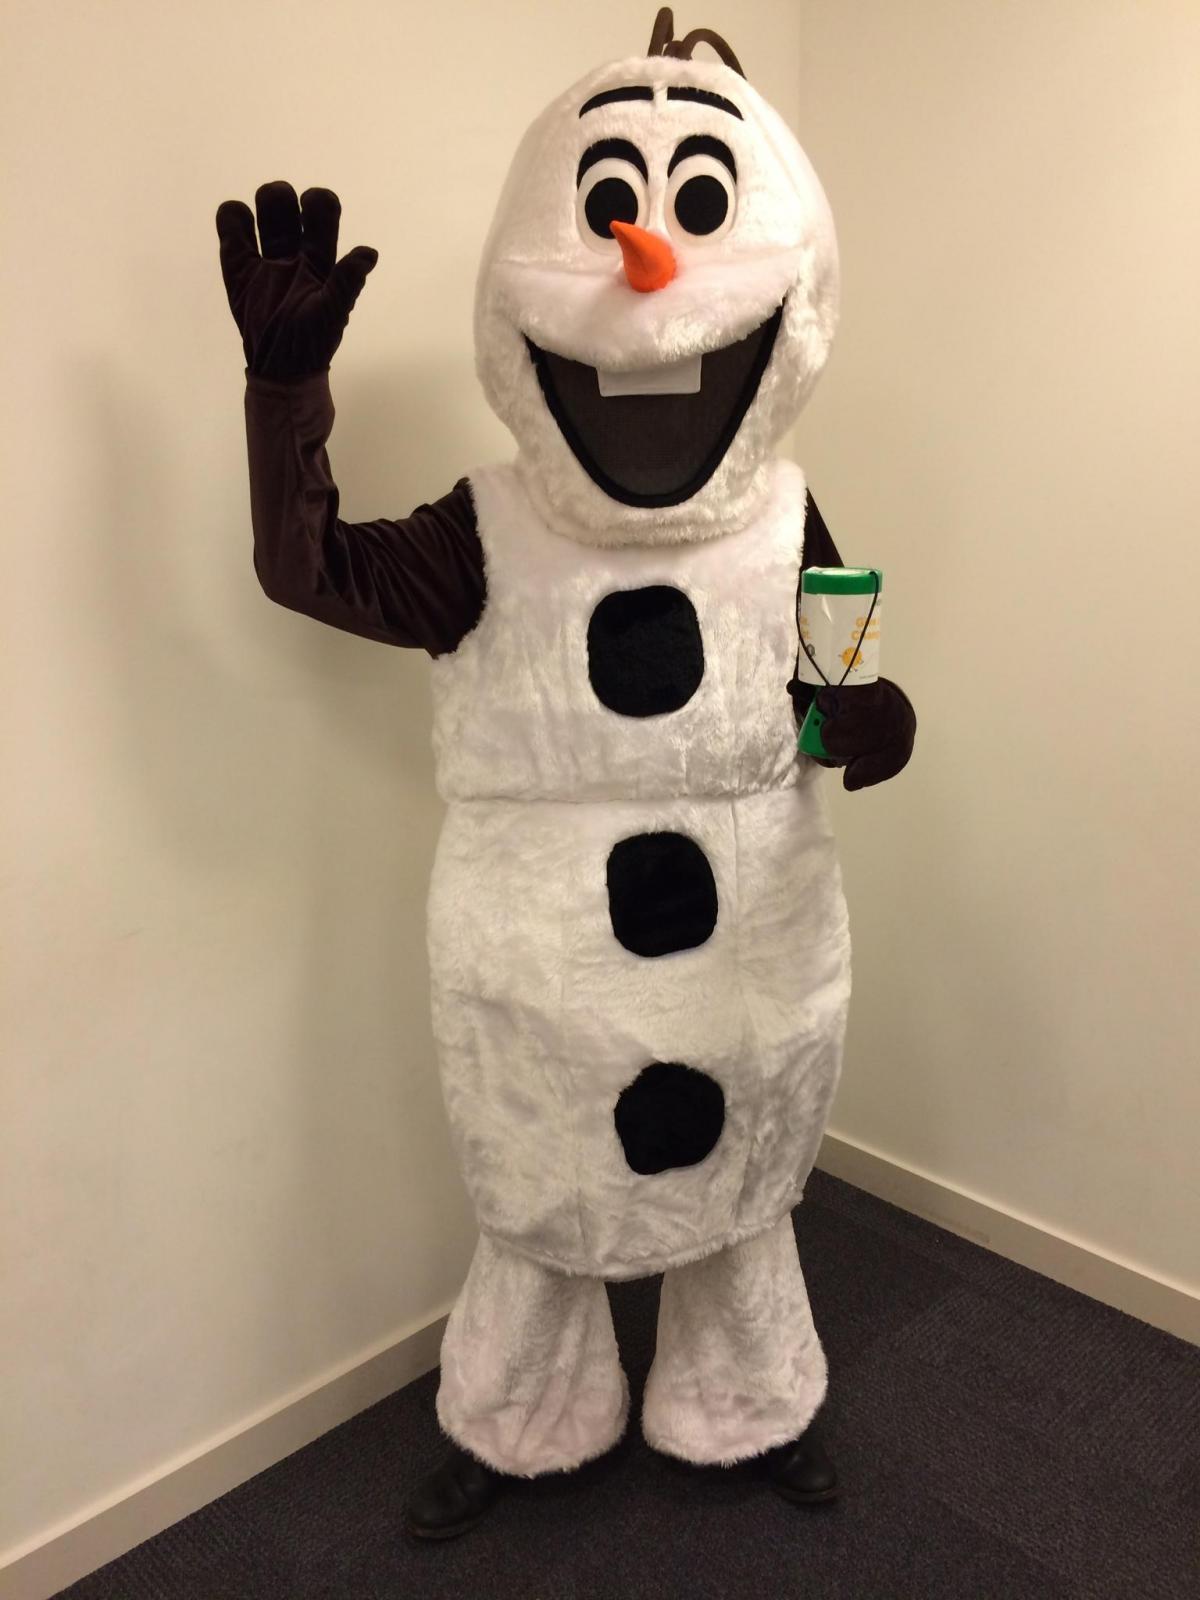 Saul Duck as Olaf from Frozen